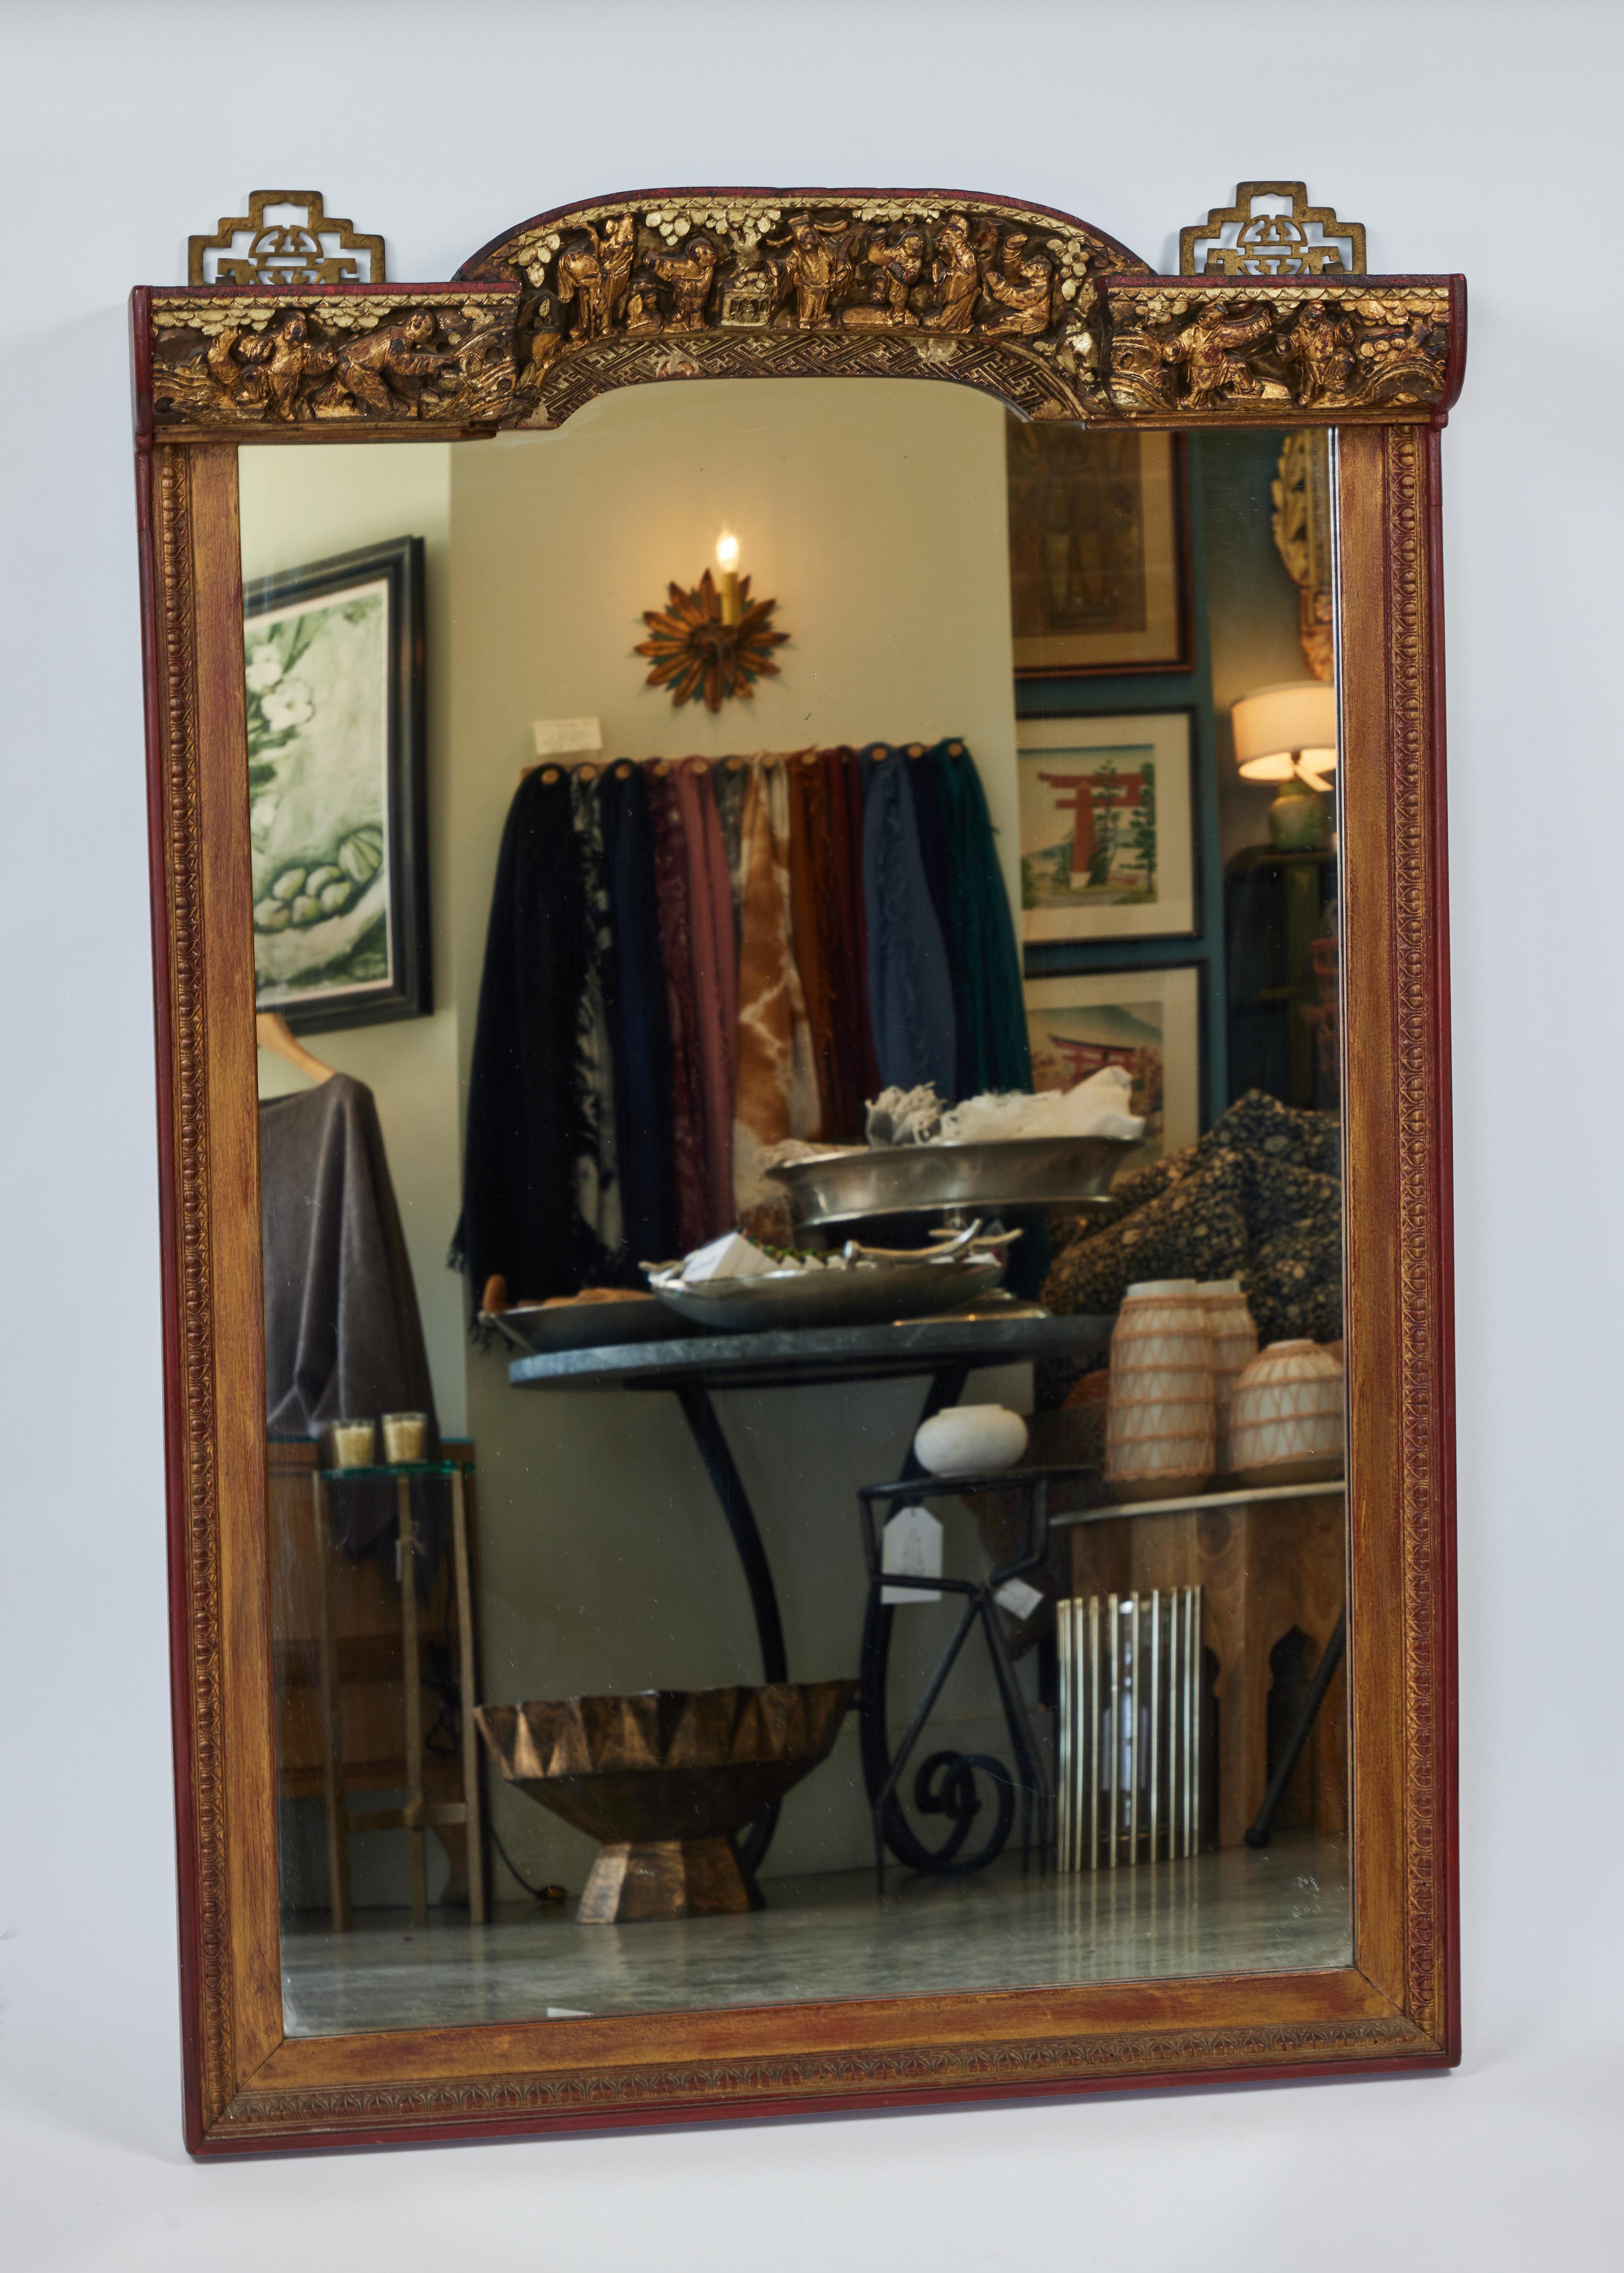 Striking antique rectangular Asian giltwood frame mirror with intricately hand carved detailing on top (depicting village life).